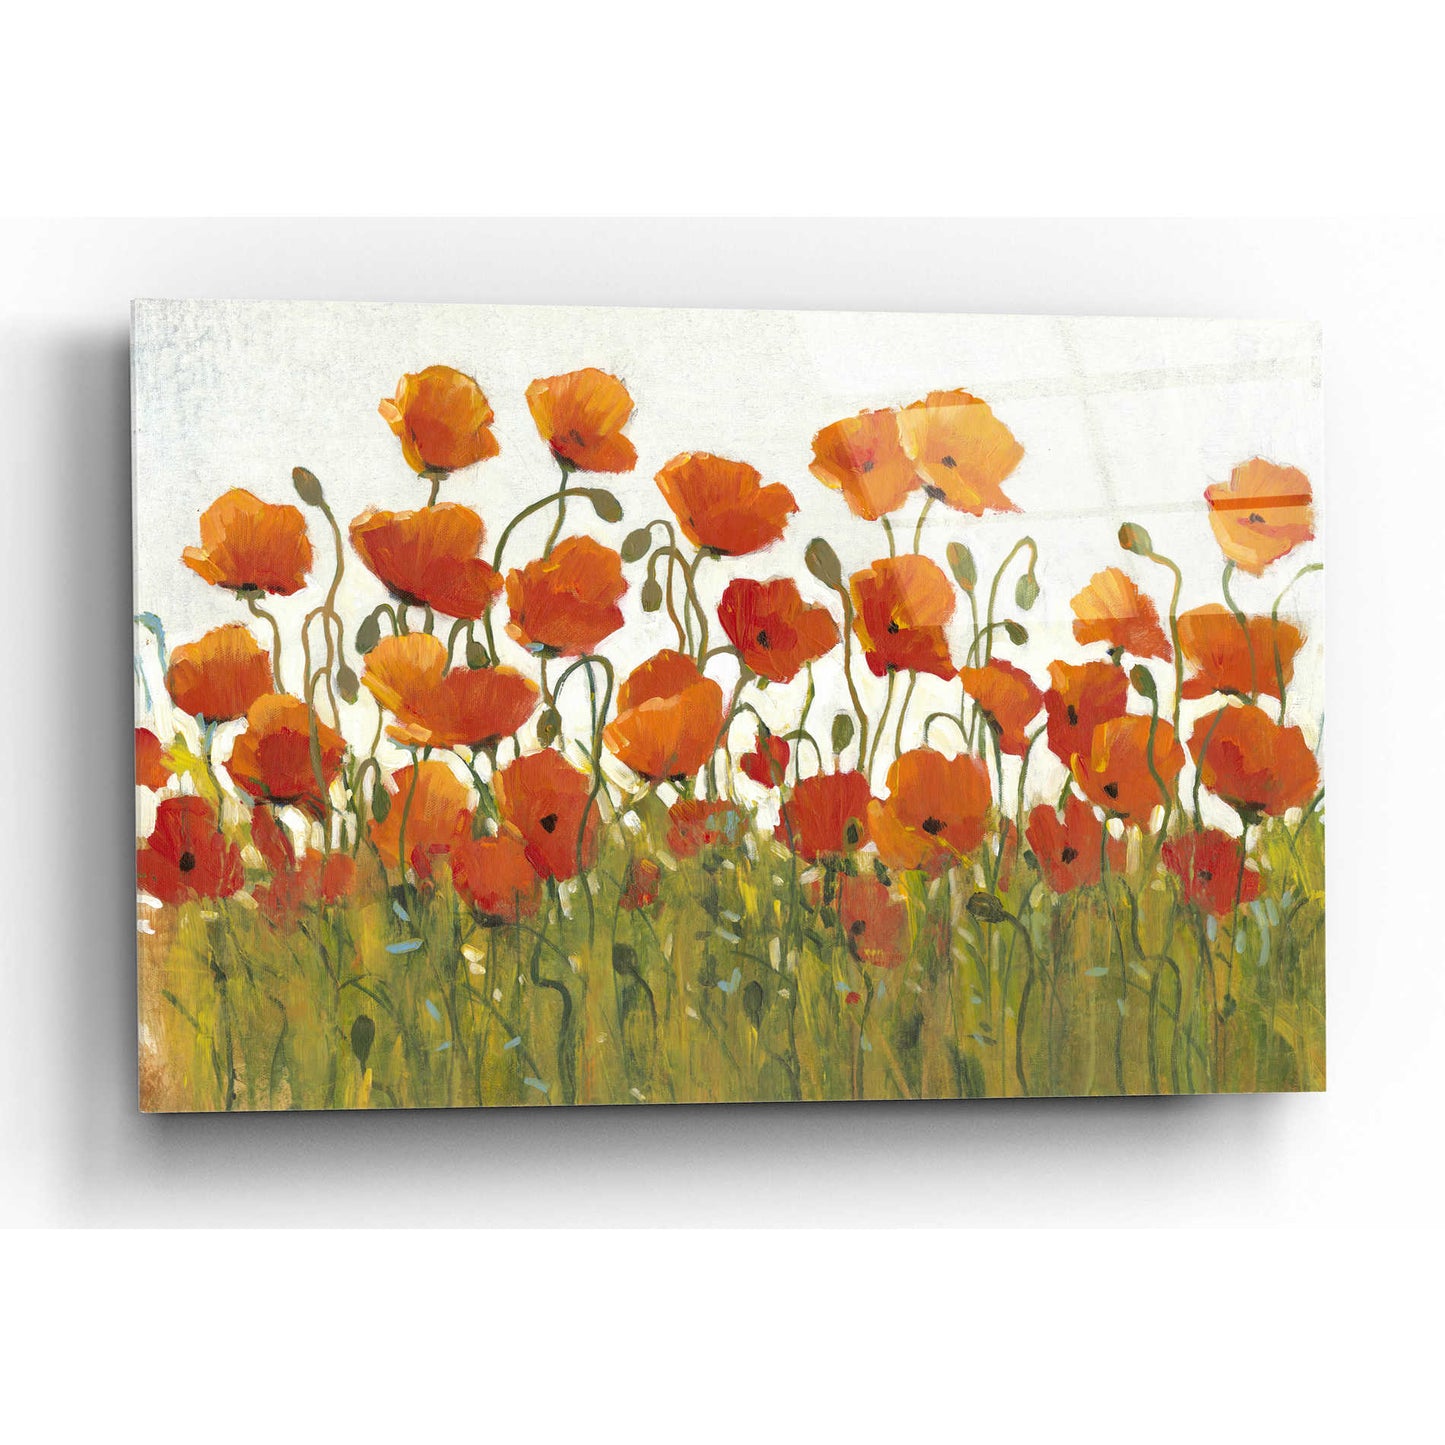 Epic Art 'Rows of Poppies I' by Tim O'Toole, Acrylic Glass Wall Art,24x16